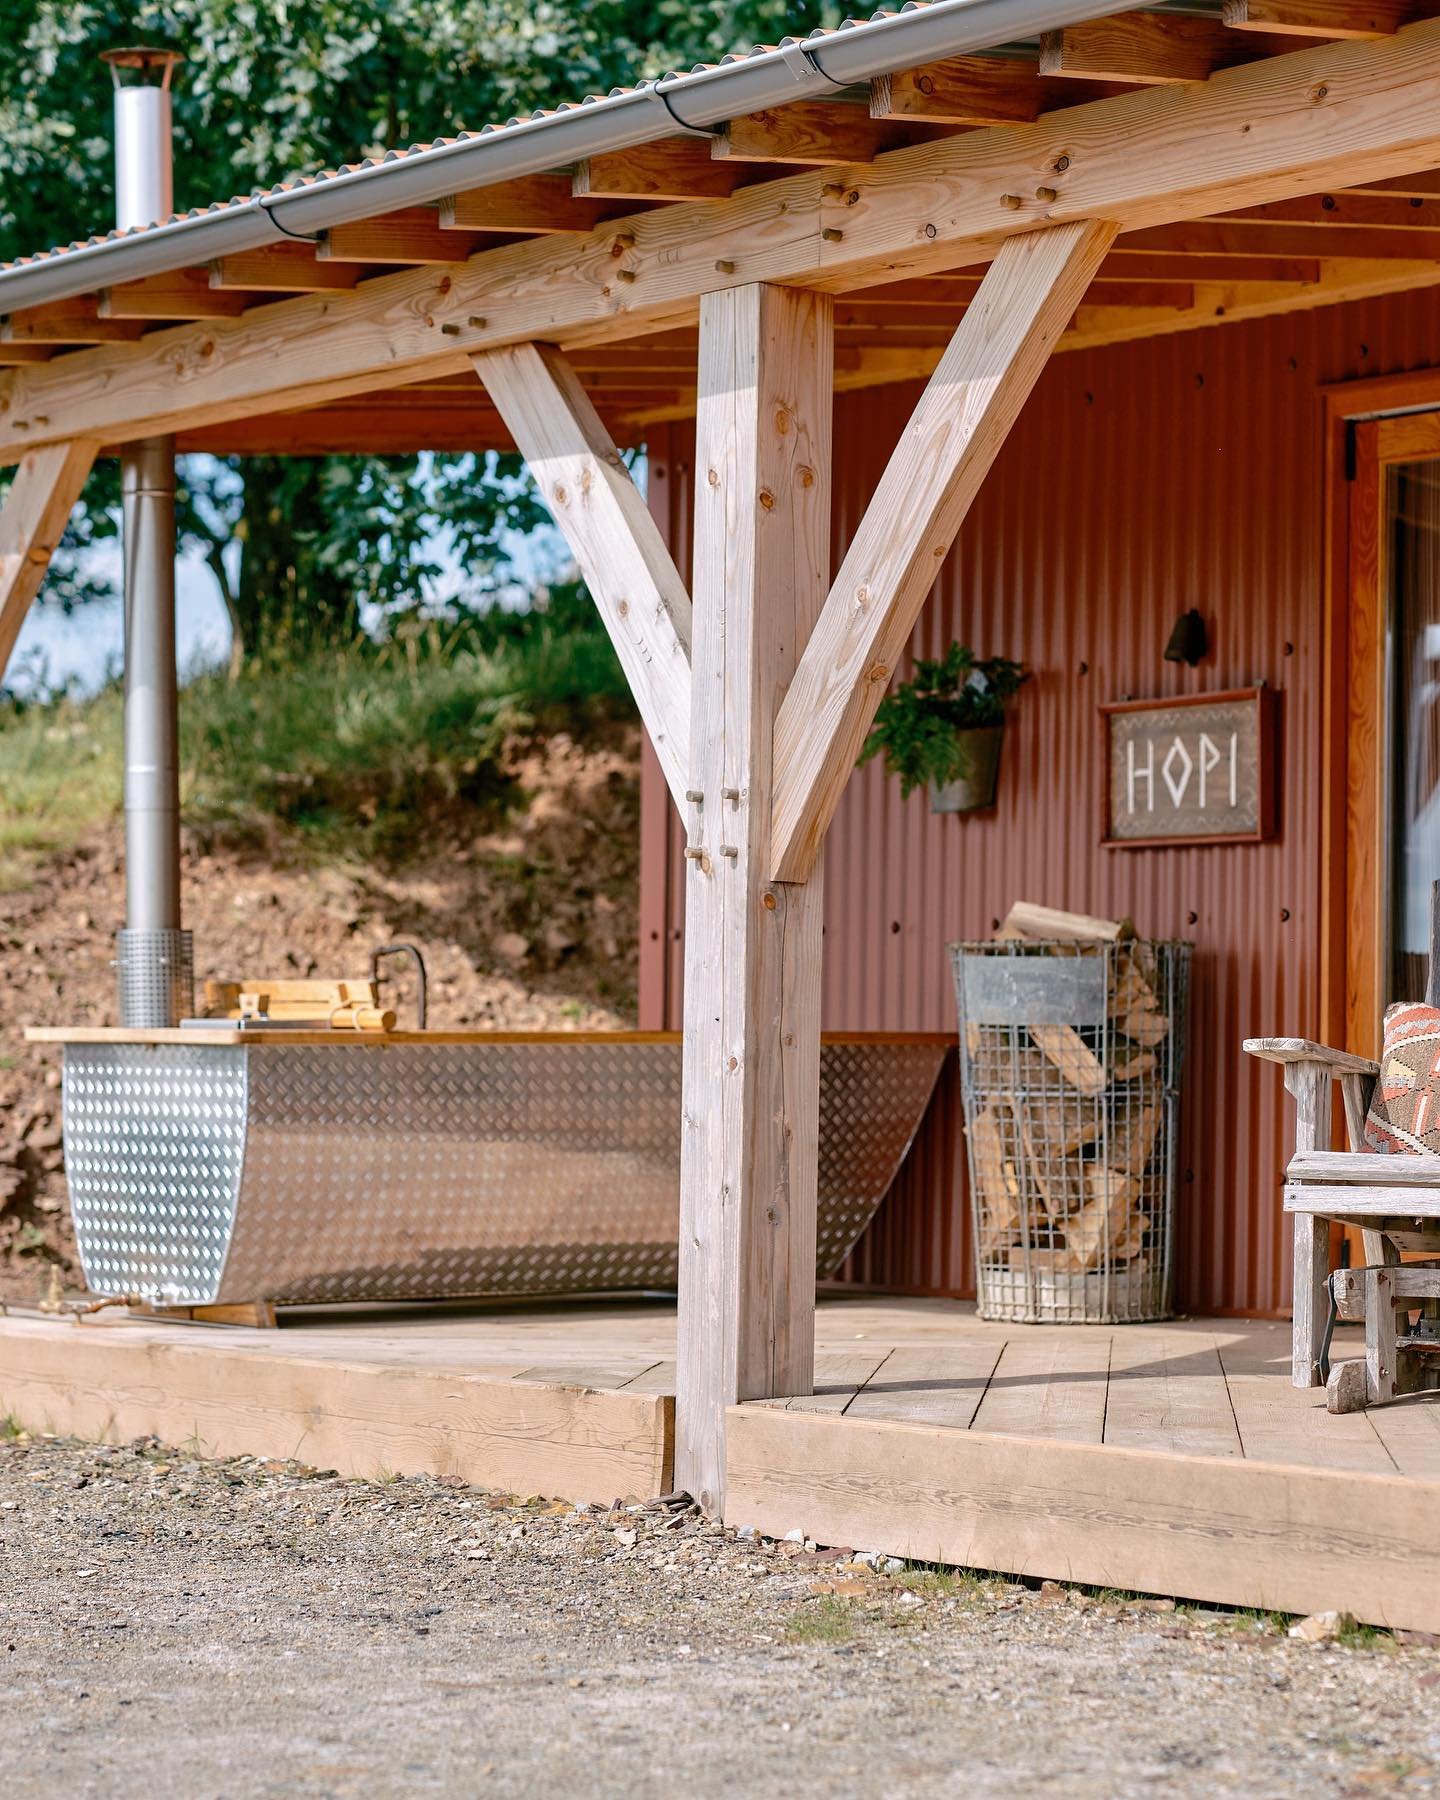 Echoing the spirit of Americana and ranch-style living, Hopi&rsquo;s porch is our favourite spot to let the world fall away 💫

Book via the link in our bio.